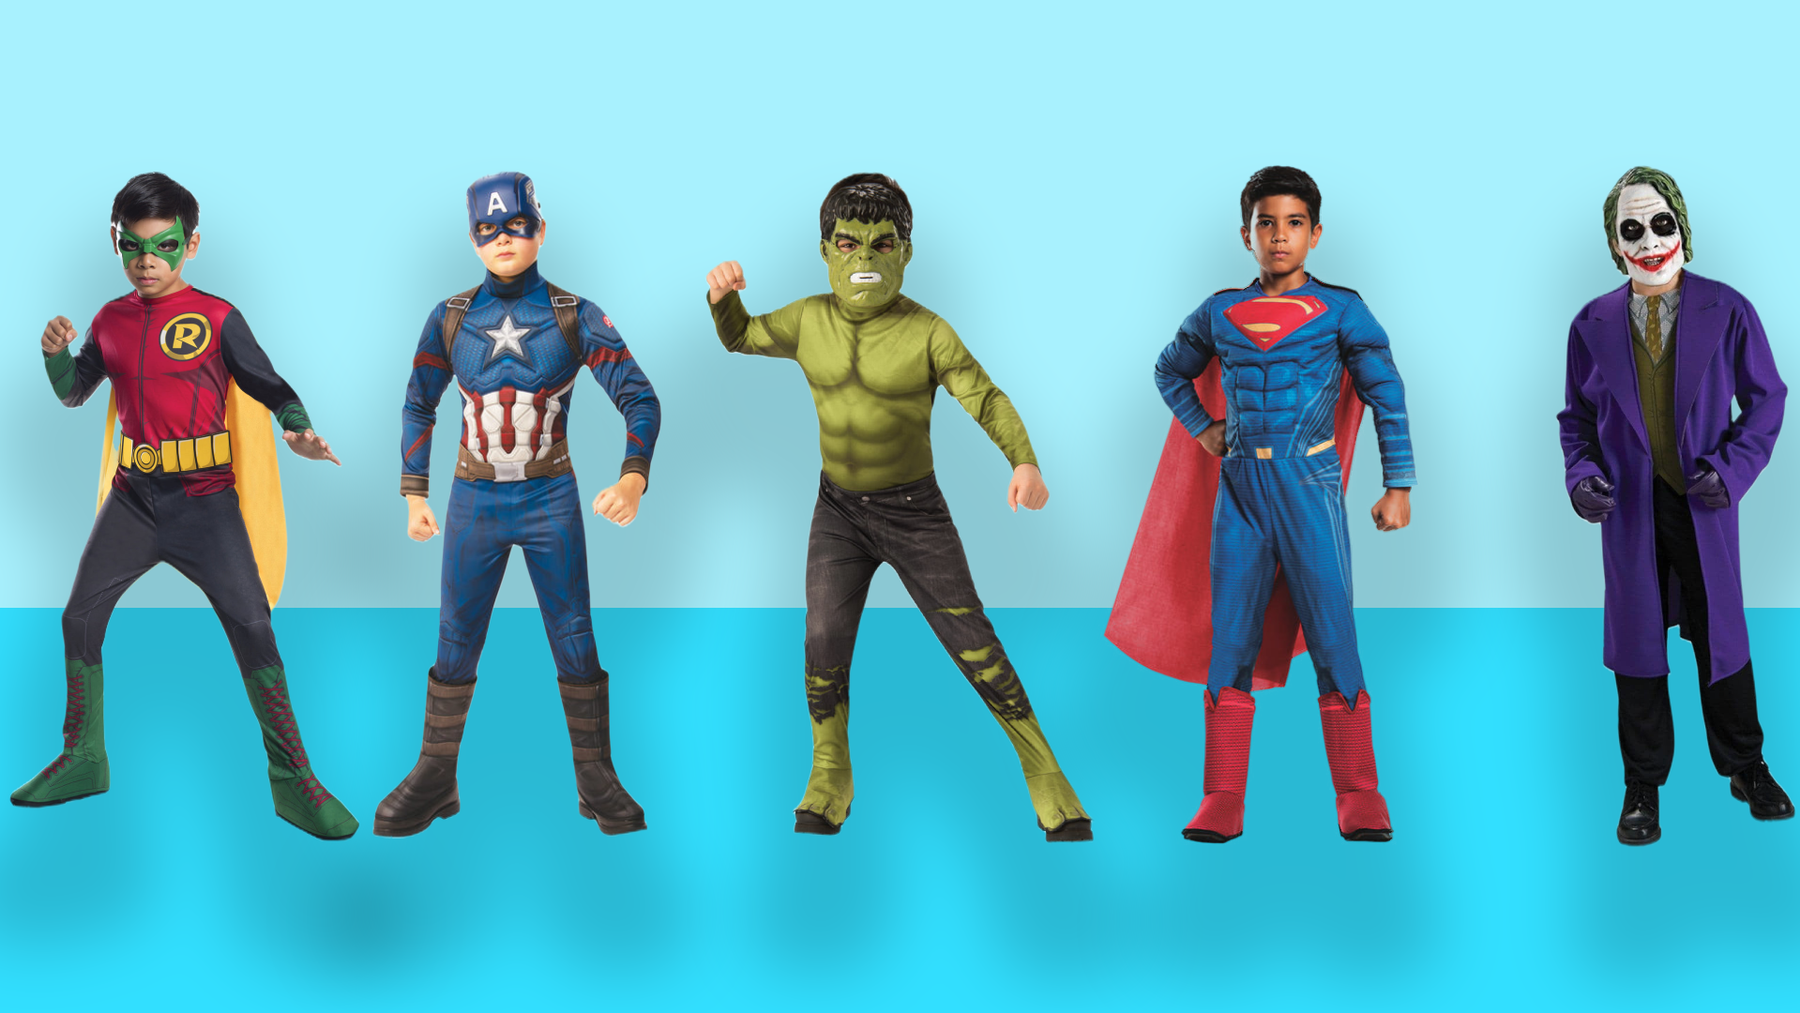 Saving the Day or Causing Chaos? The Top 5 Boy's Superhero and Villain Costumes